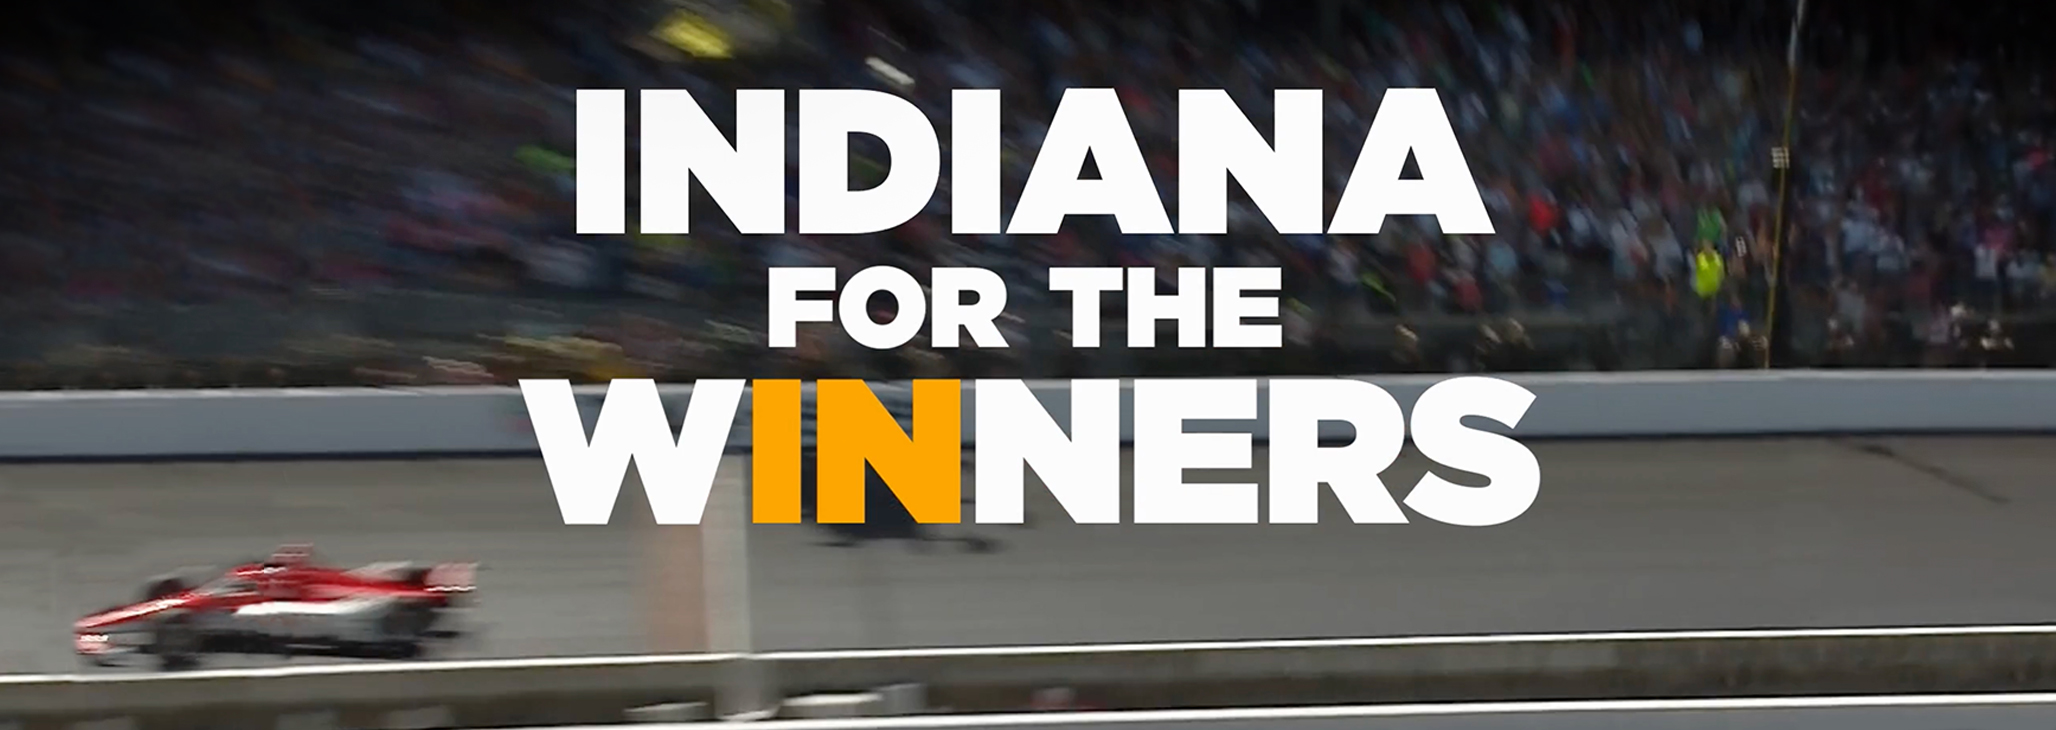 Indiana for the Winners